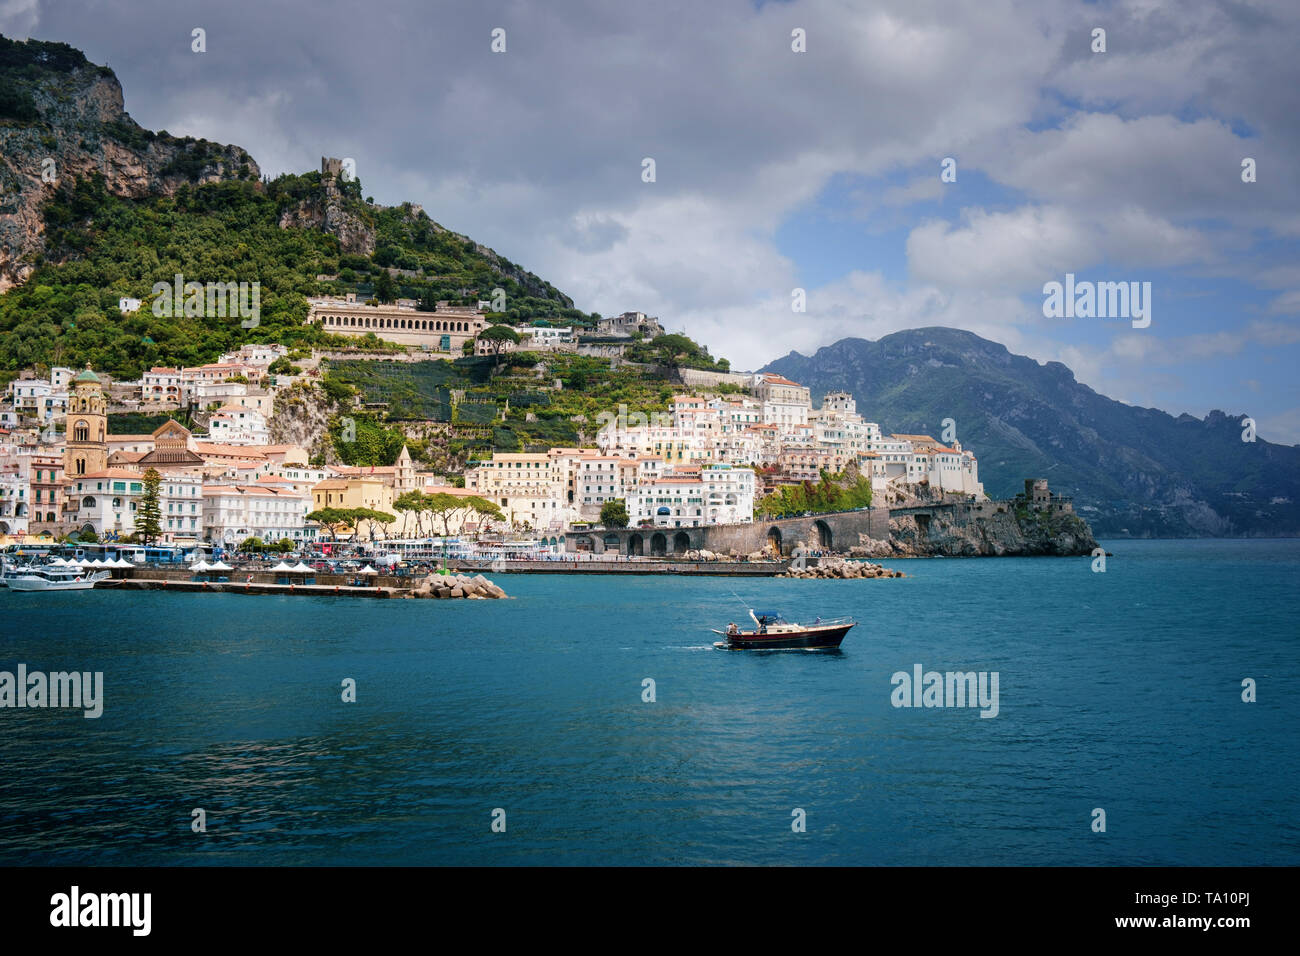 The boat heading out to the Bay of Salerno and Tyrrhenian Sea  from the coastal town of Amalfi on the Amalfi Coast of Campania in Southern Italy. Stock Photo